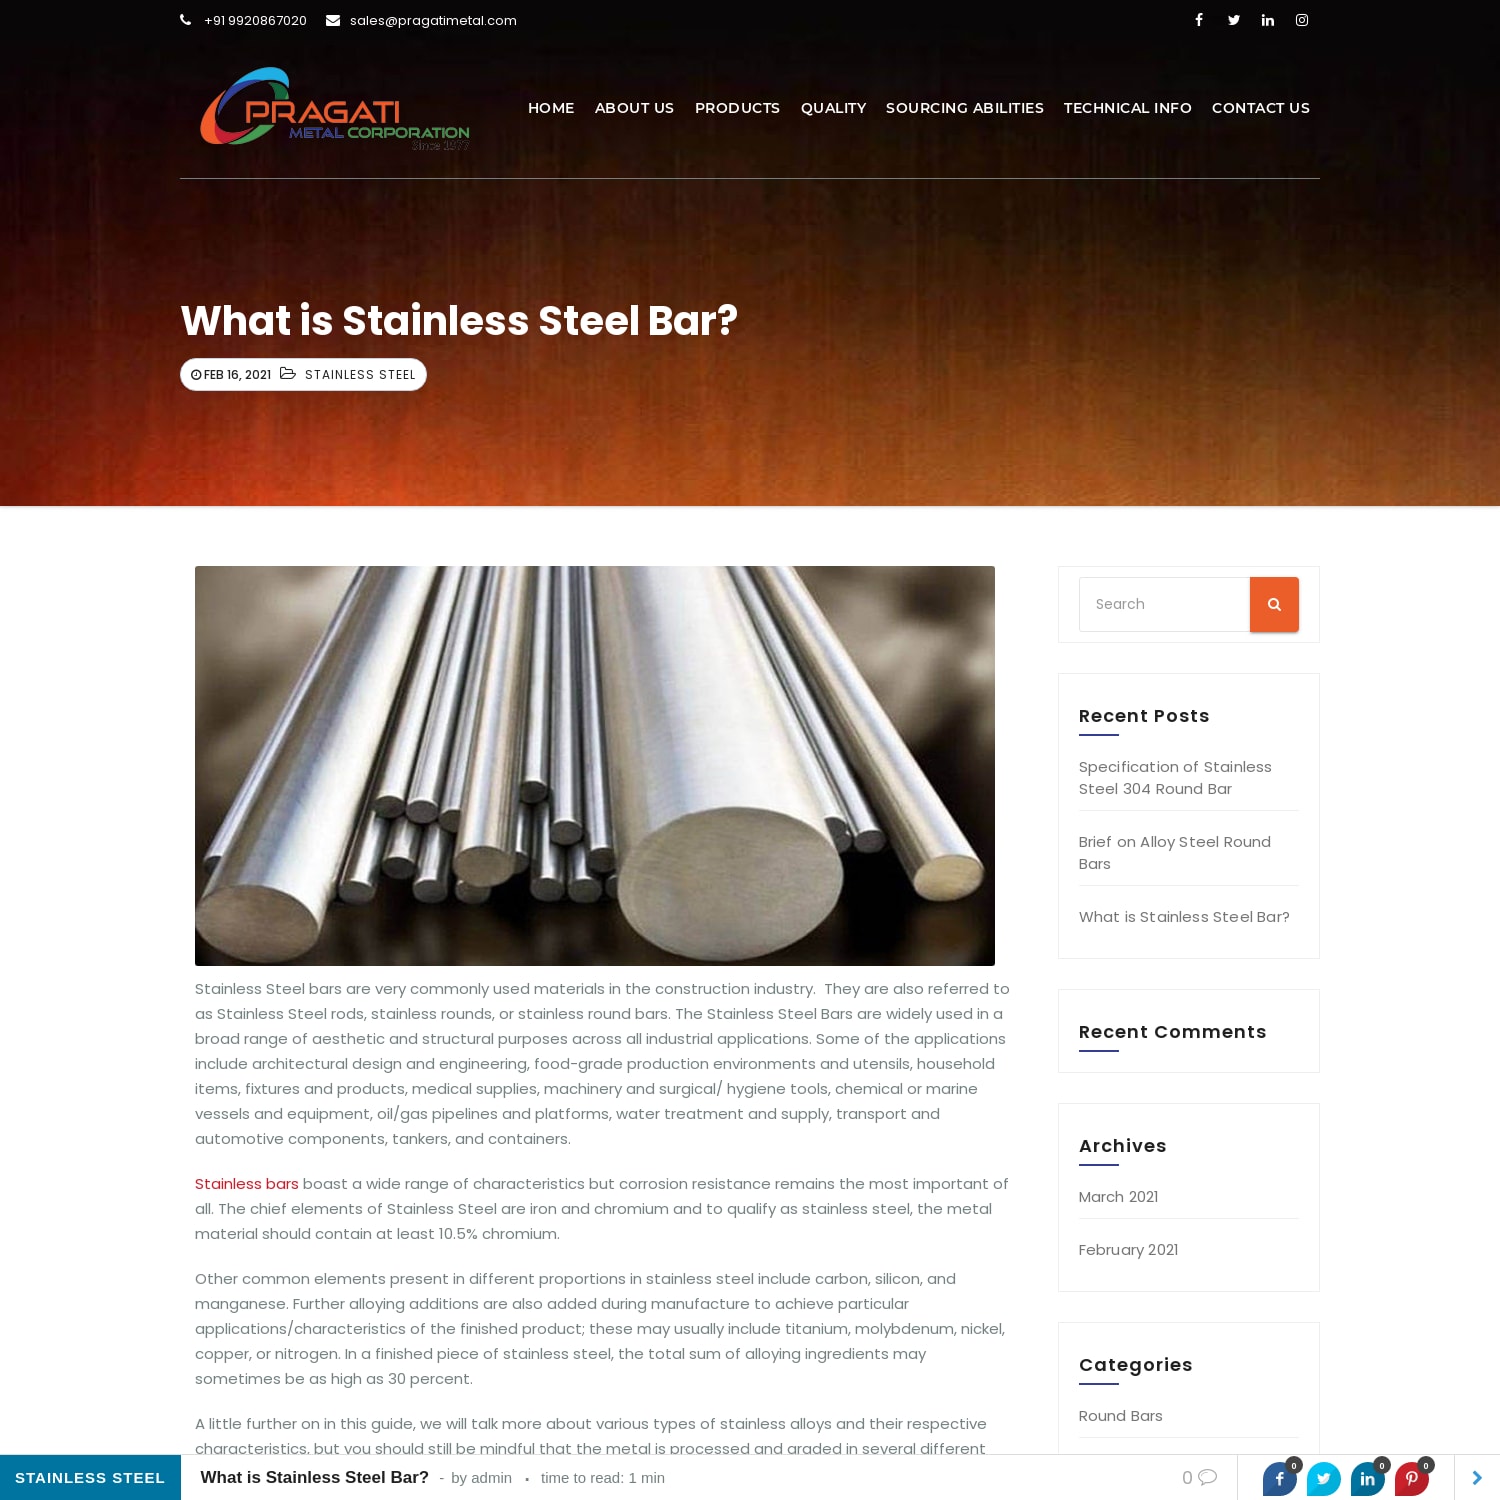 What is Stainless Steel Bar?